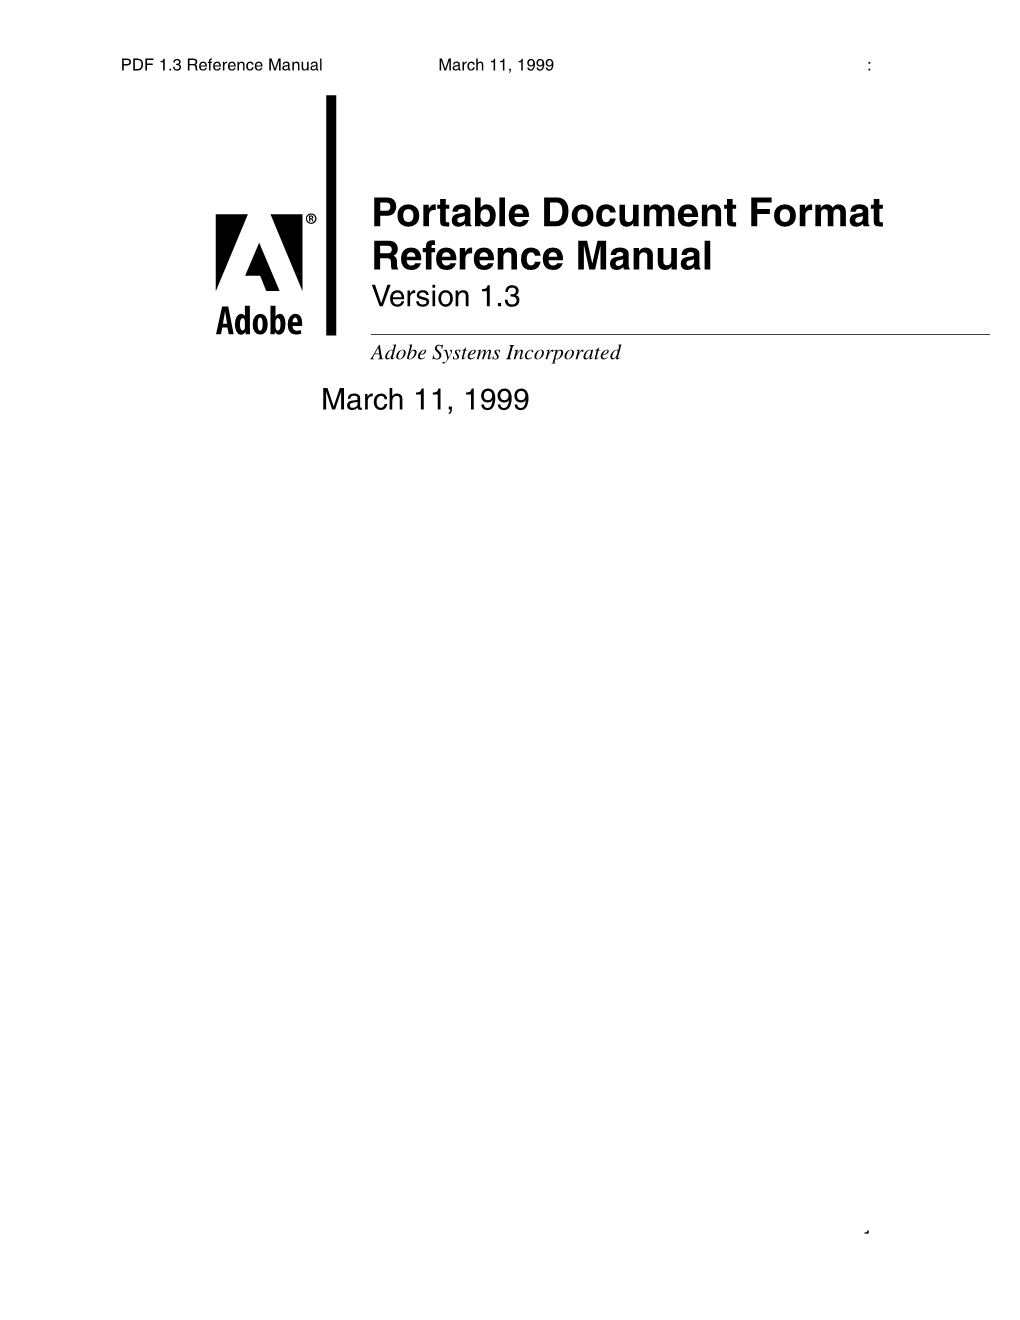 Portable Document Reference Manual, Version